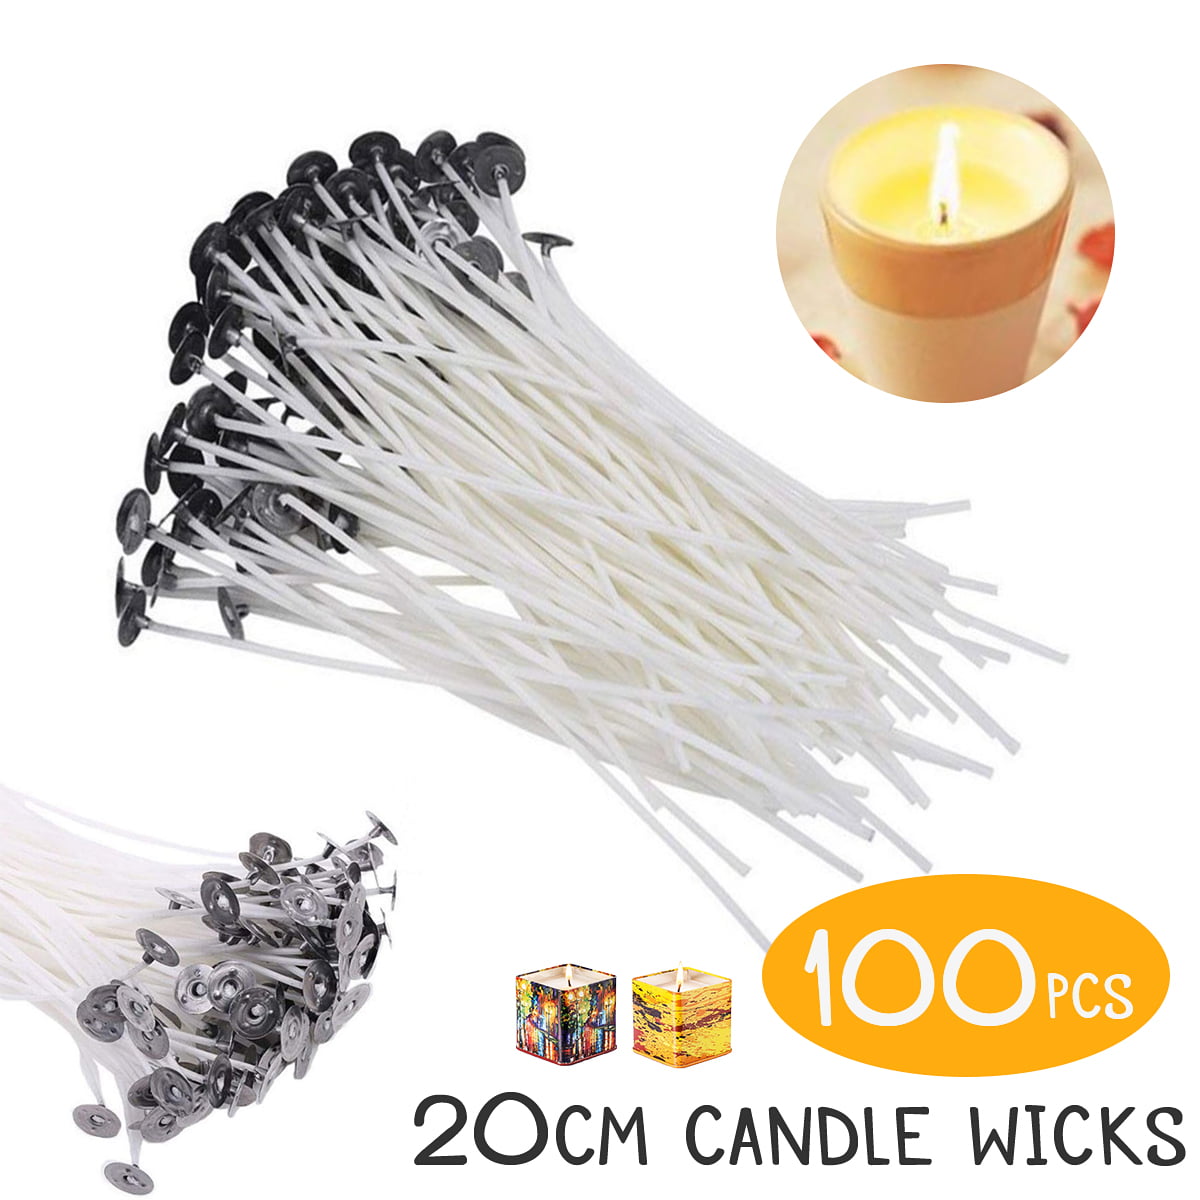 100pc 6 Inch Candle Wicks Pre-Waxed Wick For Cotton Core Candles DIY Making 15cm